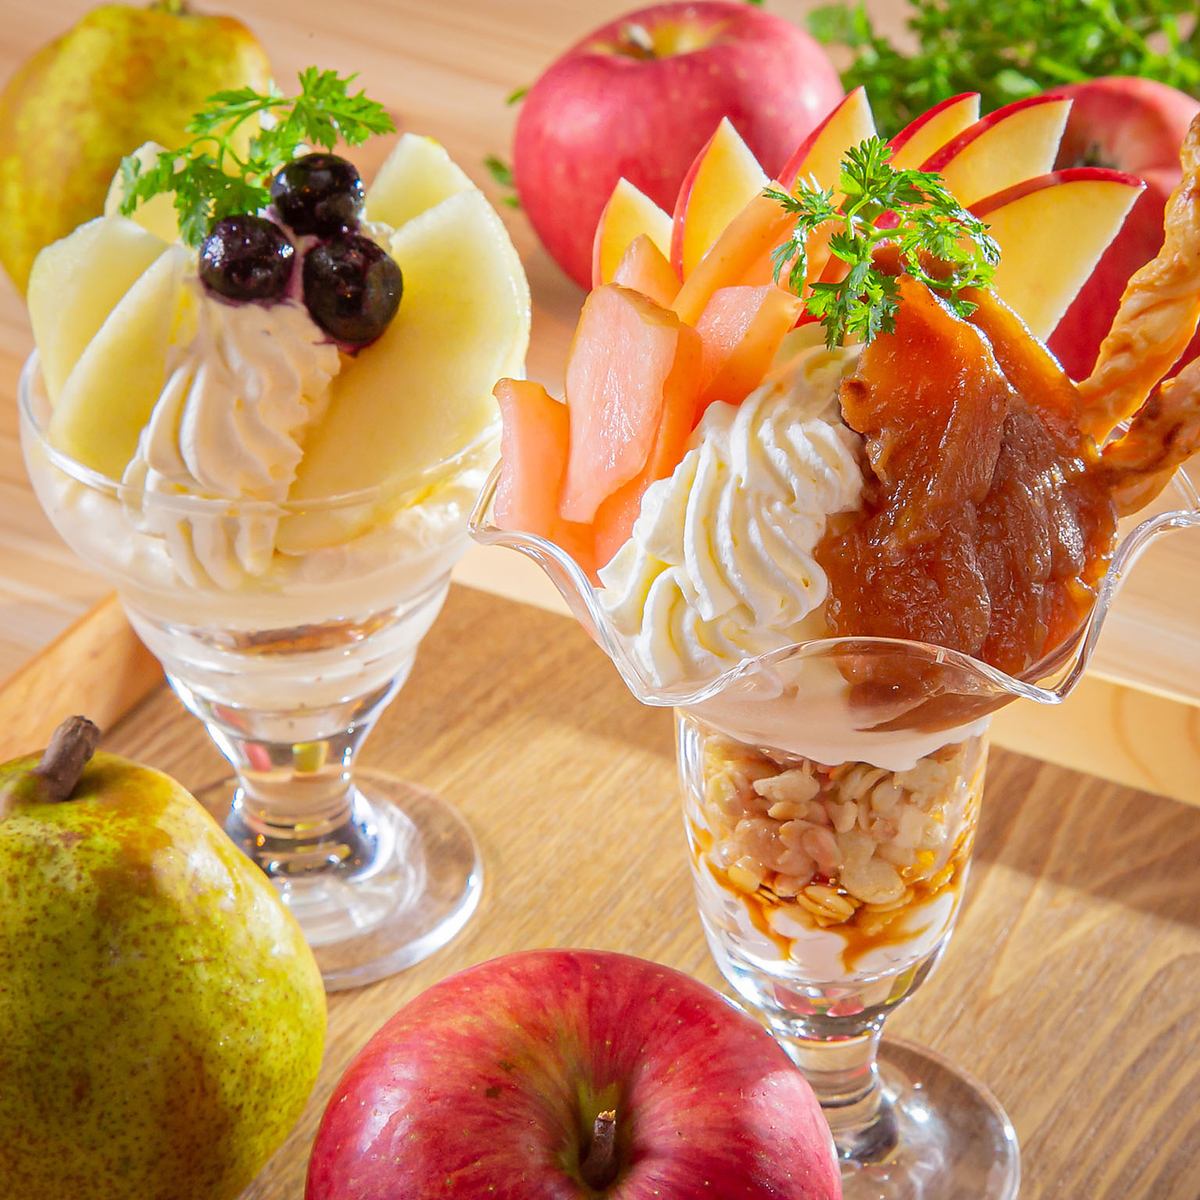 Restaurants and cafes where you can enjoy sweets and seasonal lunches with seasonal fruits